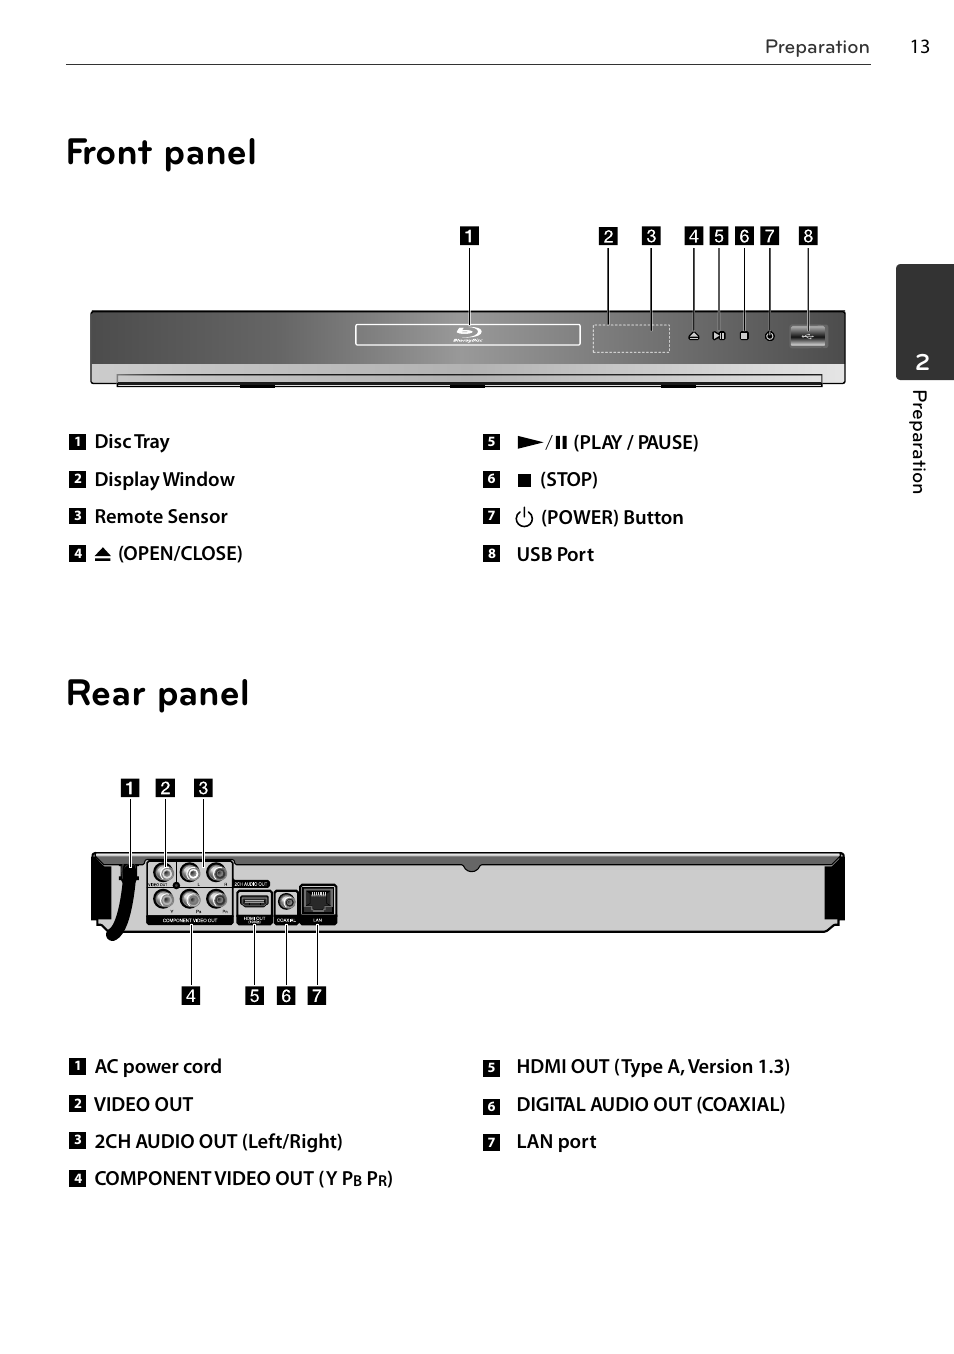 Front panel rear panel | LG BD678N User Manual | Page 13 / 72